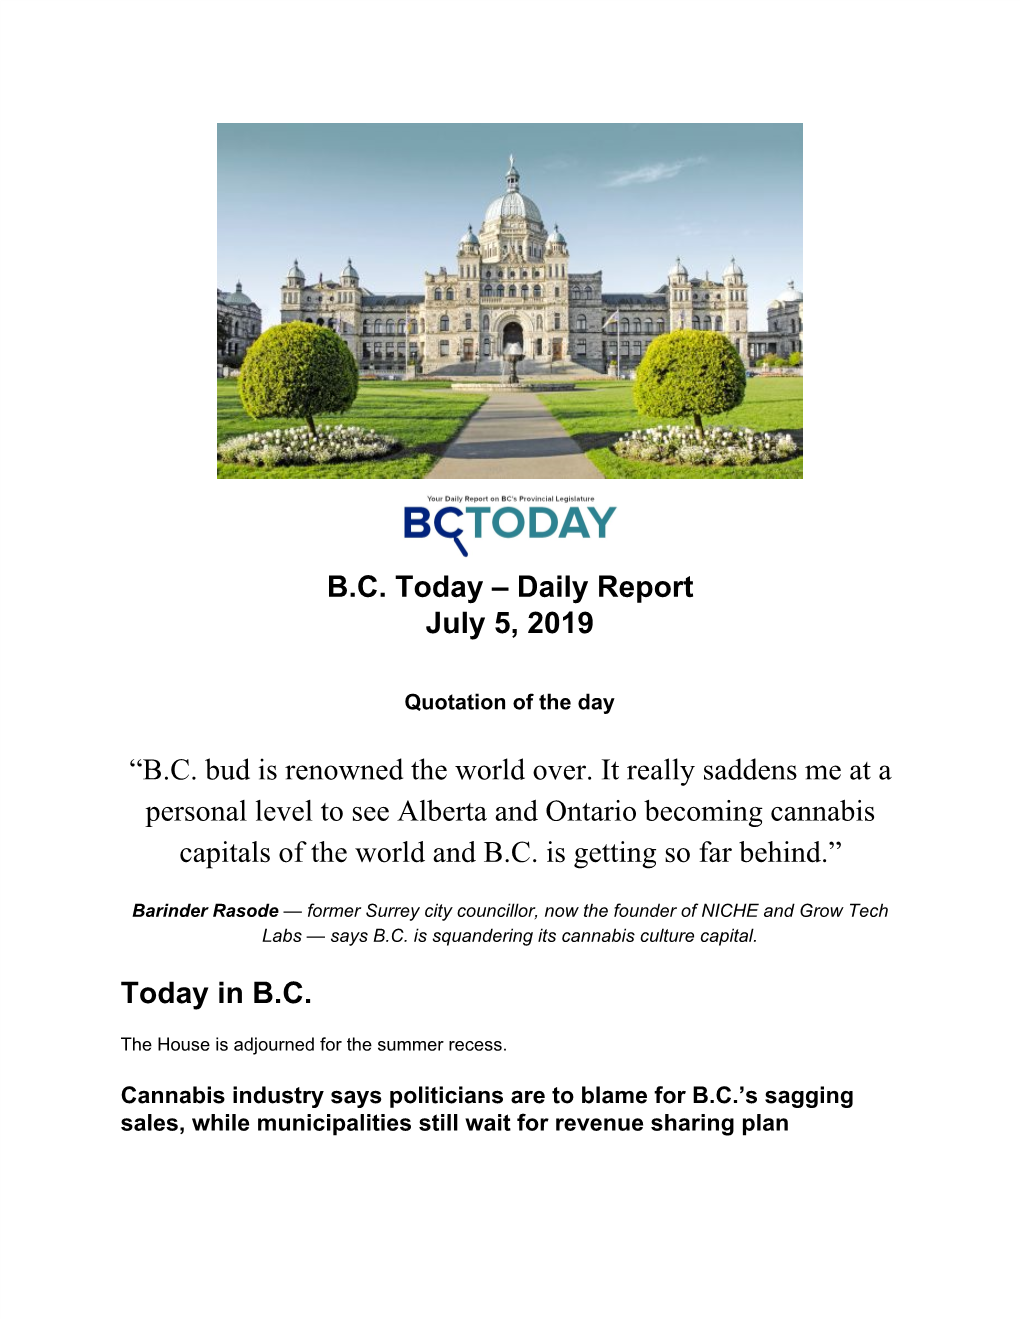 BC Today – Daily Report July 5, 2019 “BC Bud Is